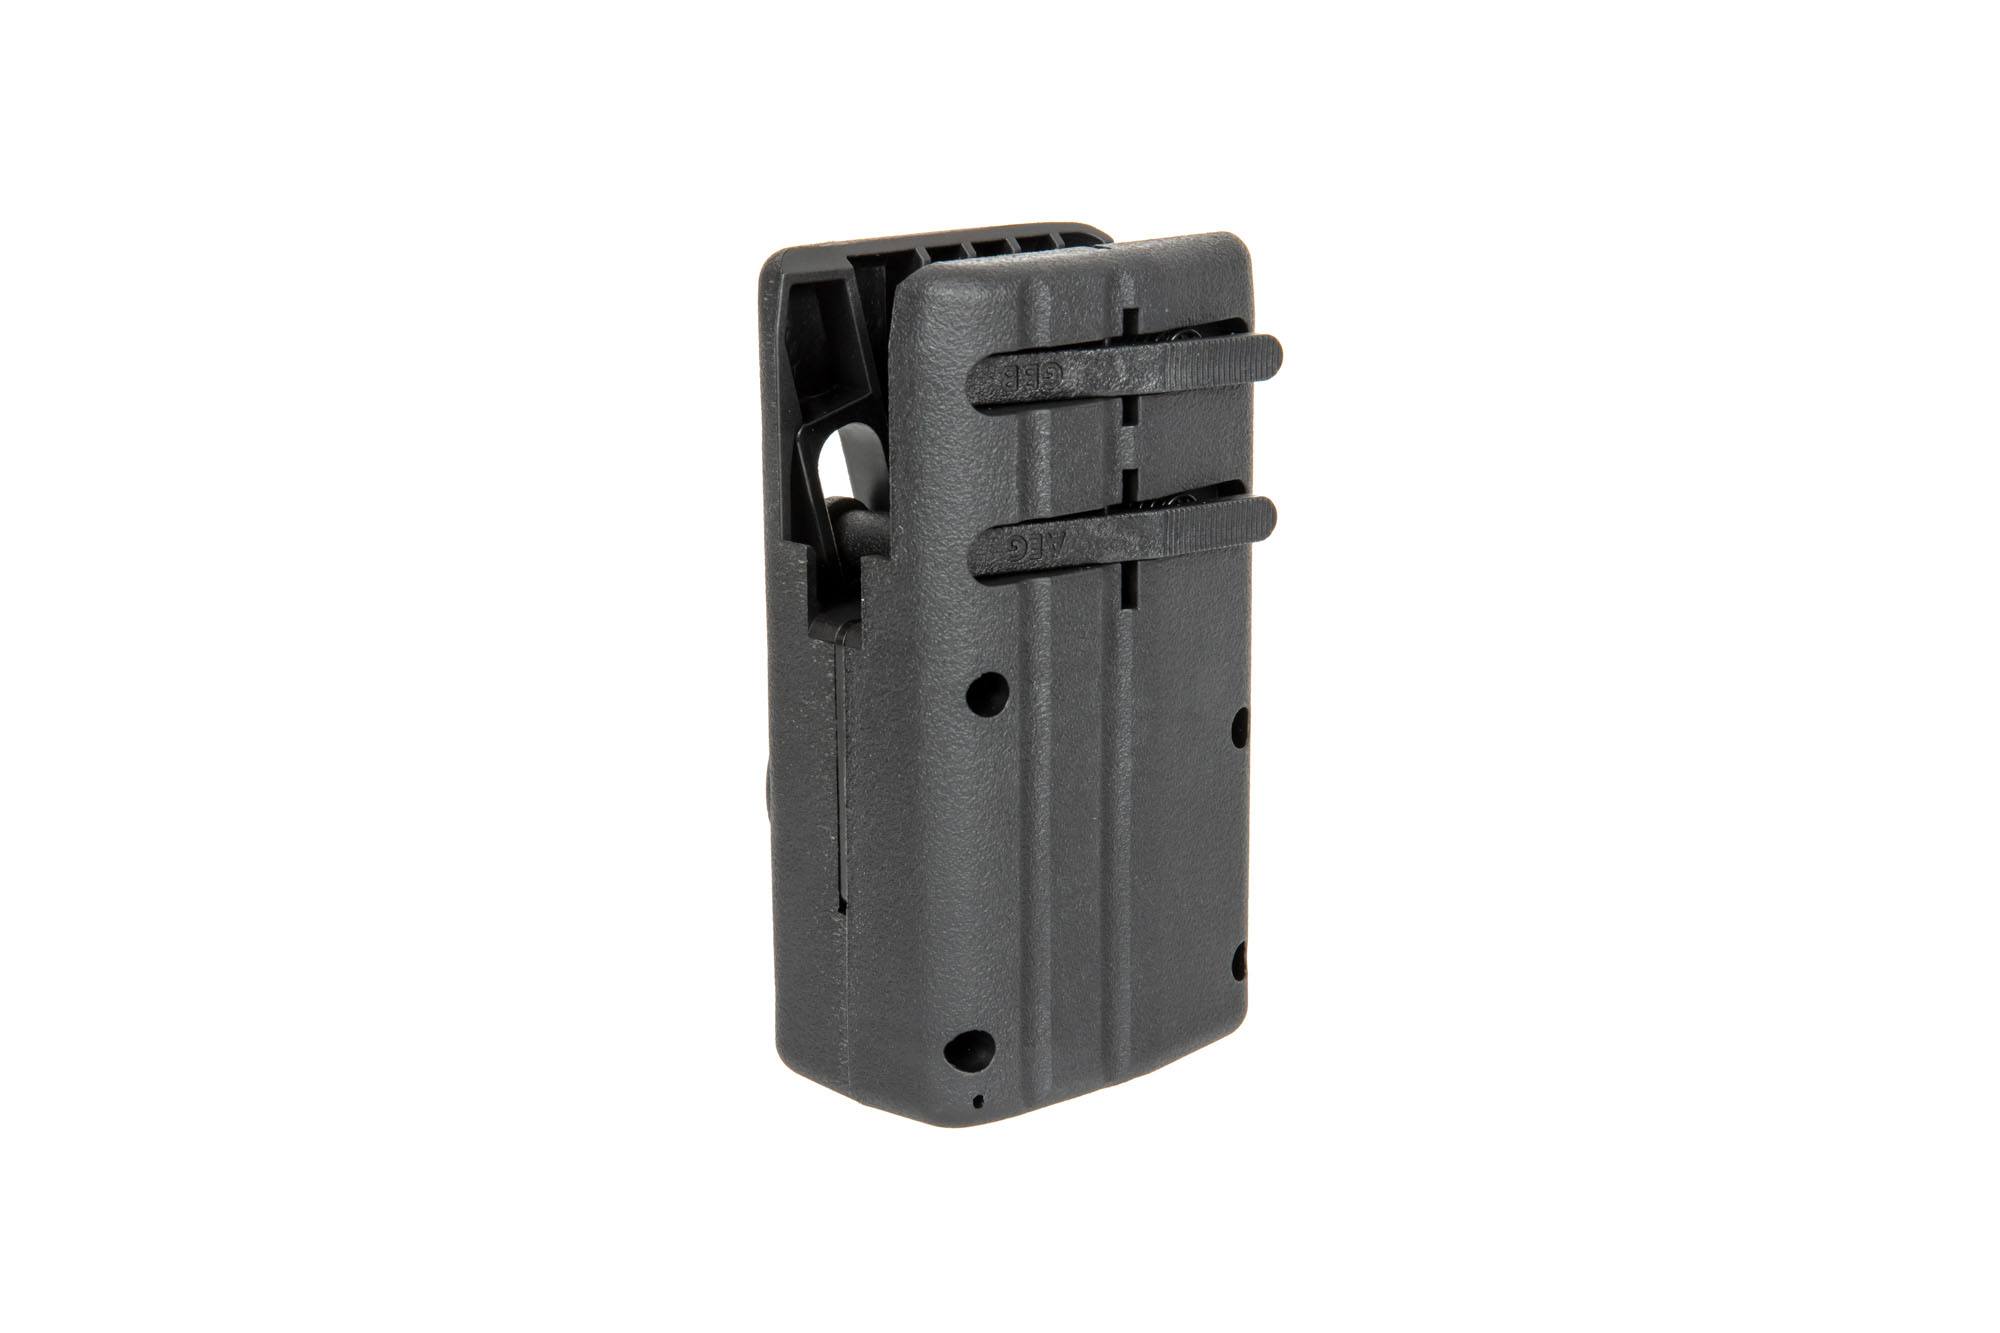 Speedloader with Crank for M4/M16 Magazines